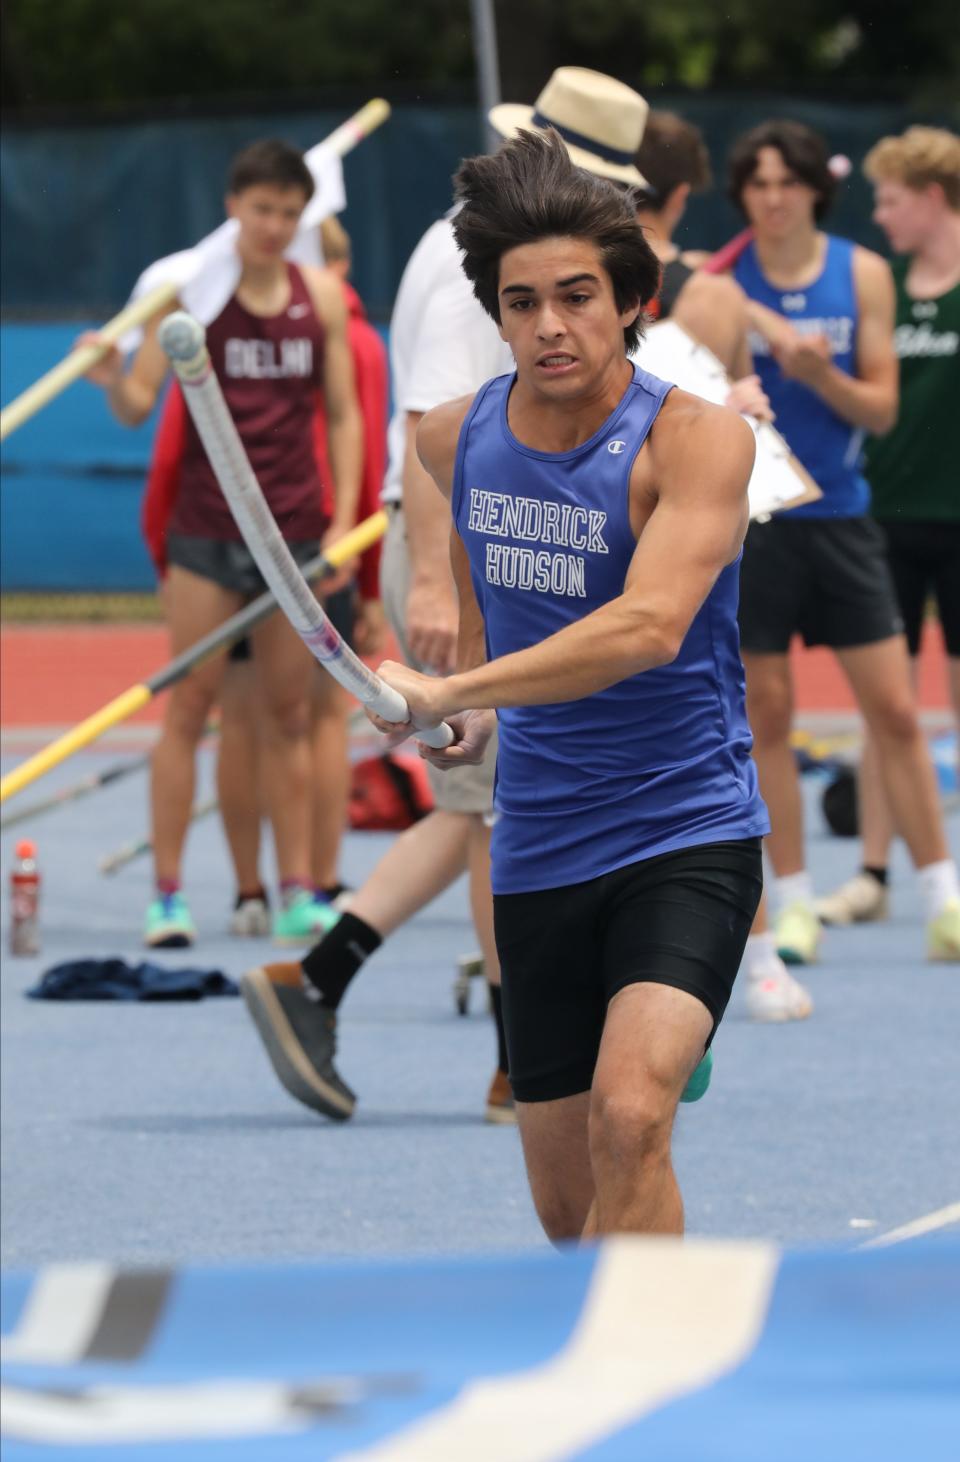 Trey Feirman from Hendrick Hudson competes in the pole vault during the New York State Track and Field Championships at Middletown High School, June 9, 2023.